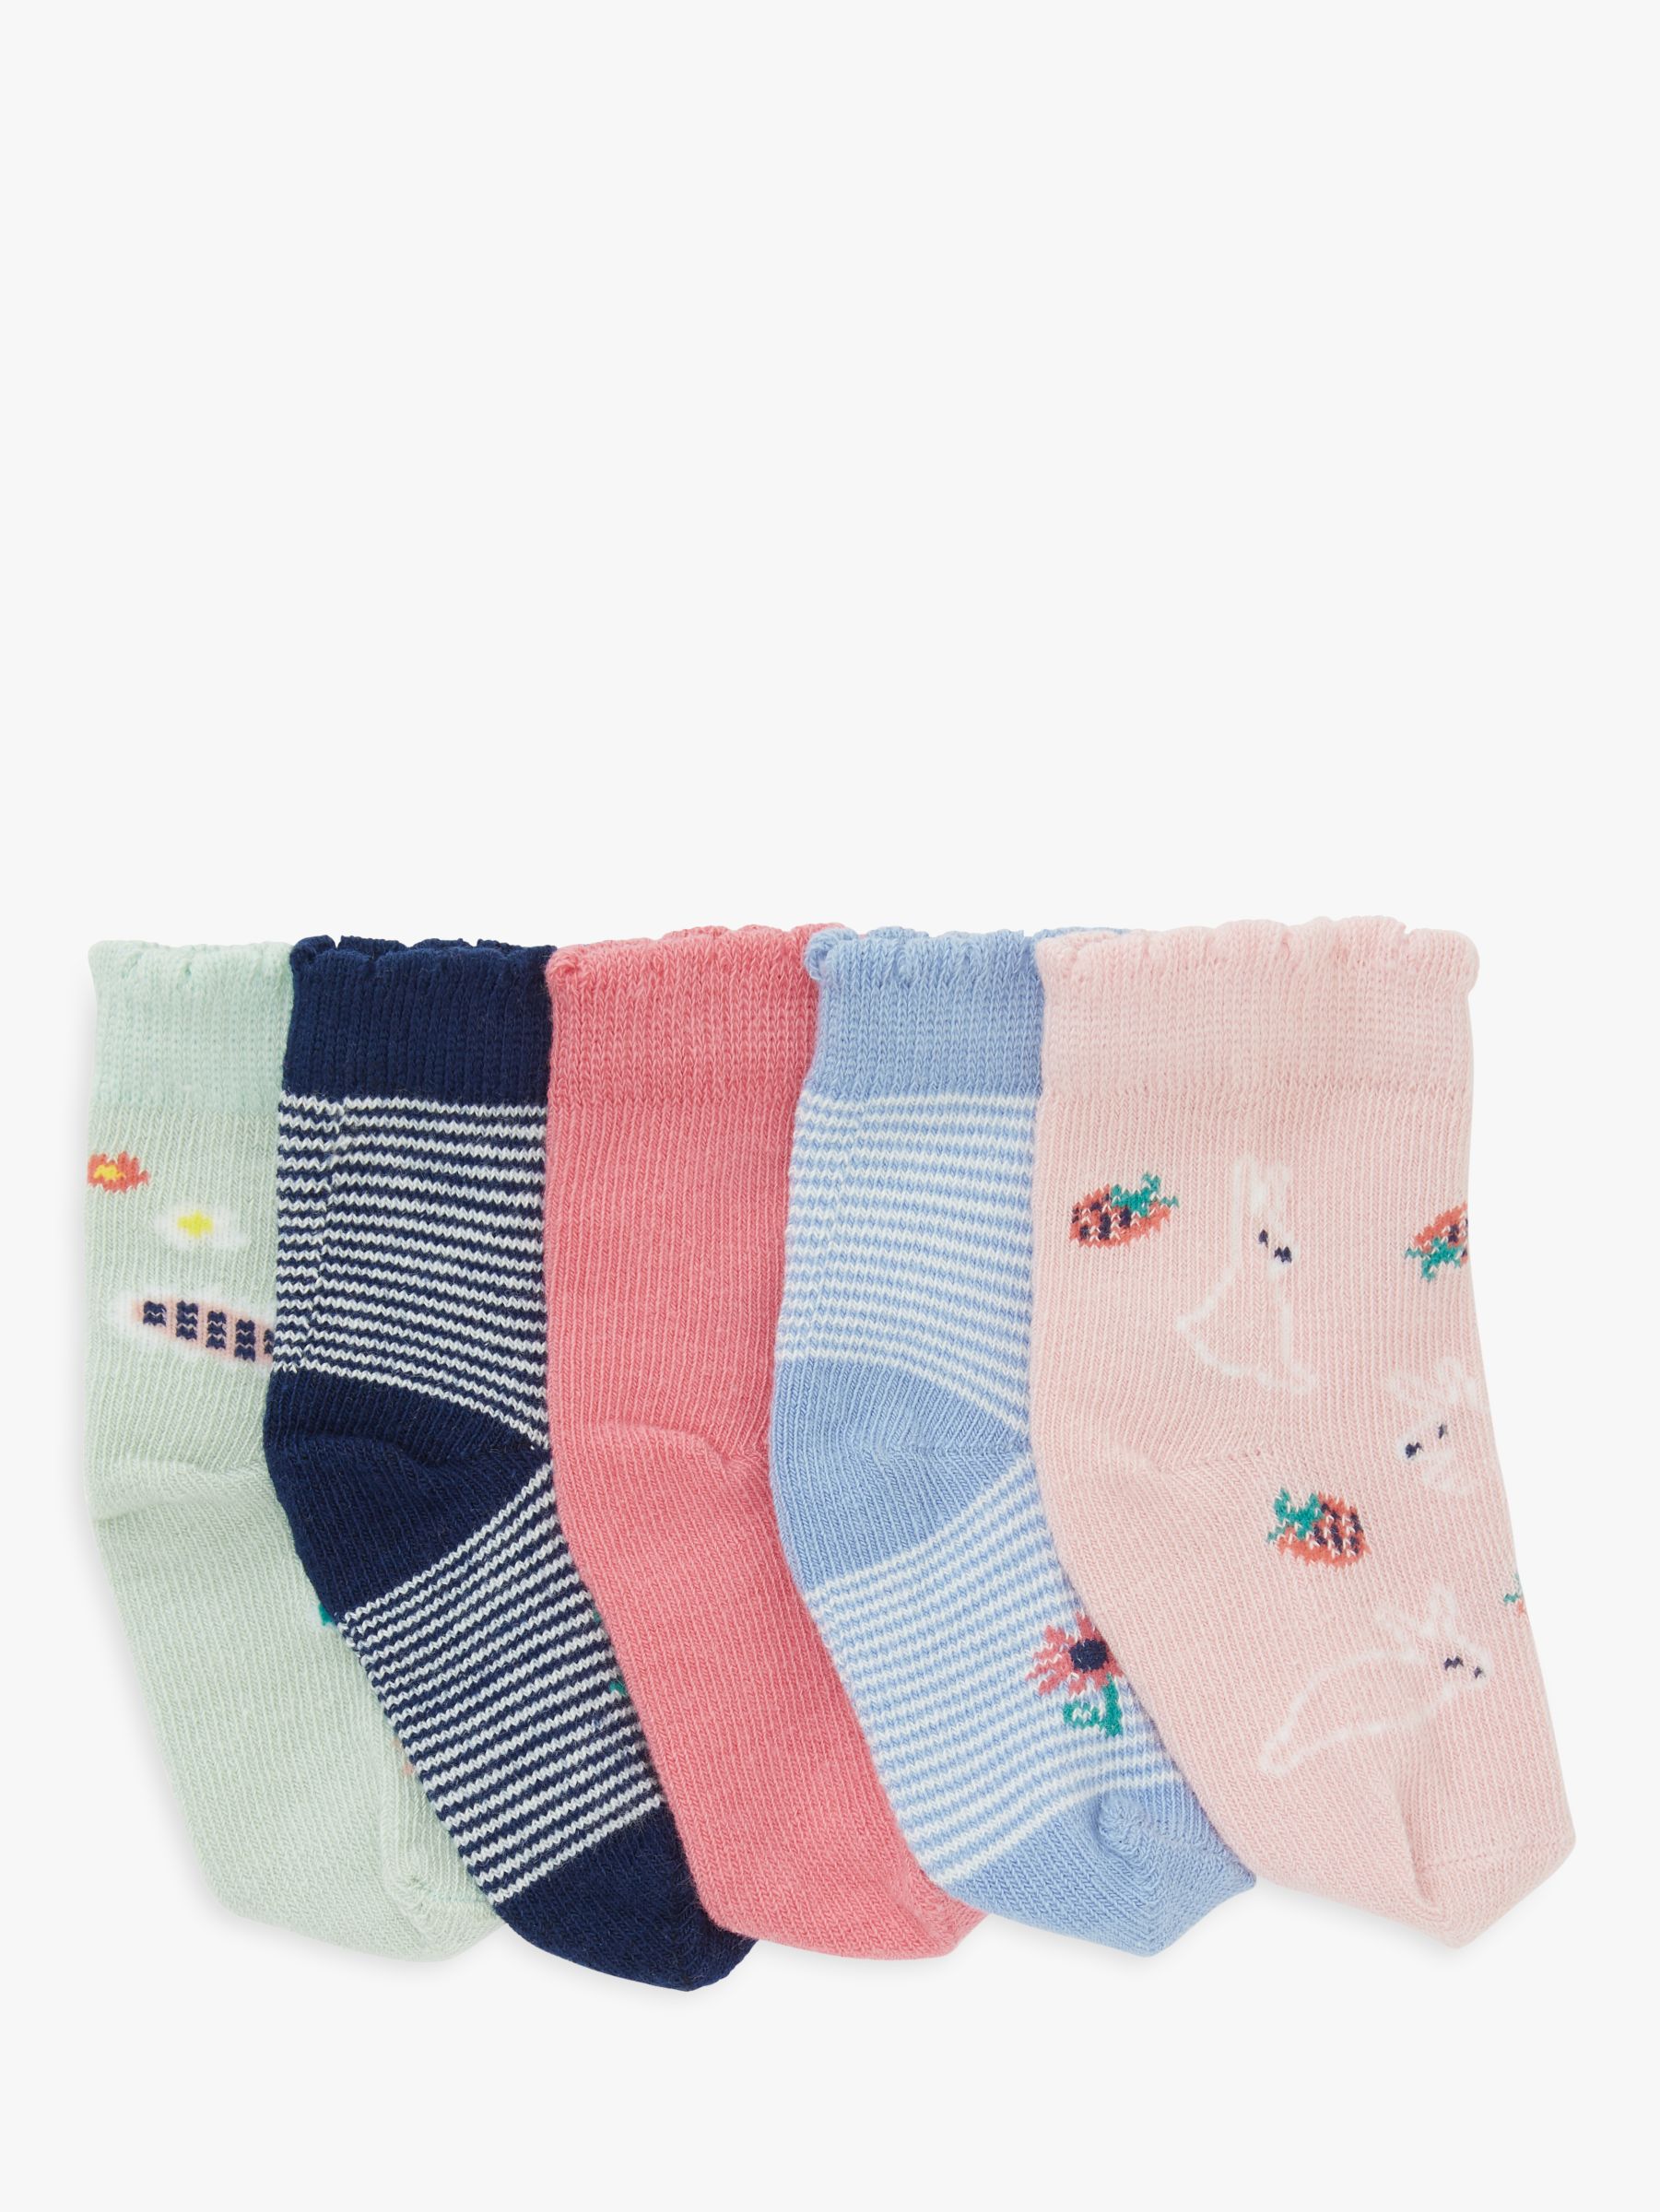 John Lewis & Partners Baby Cotton Rich Bunny Socks, Pack of 5, Multi, 0-3 months